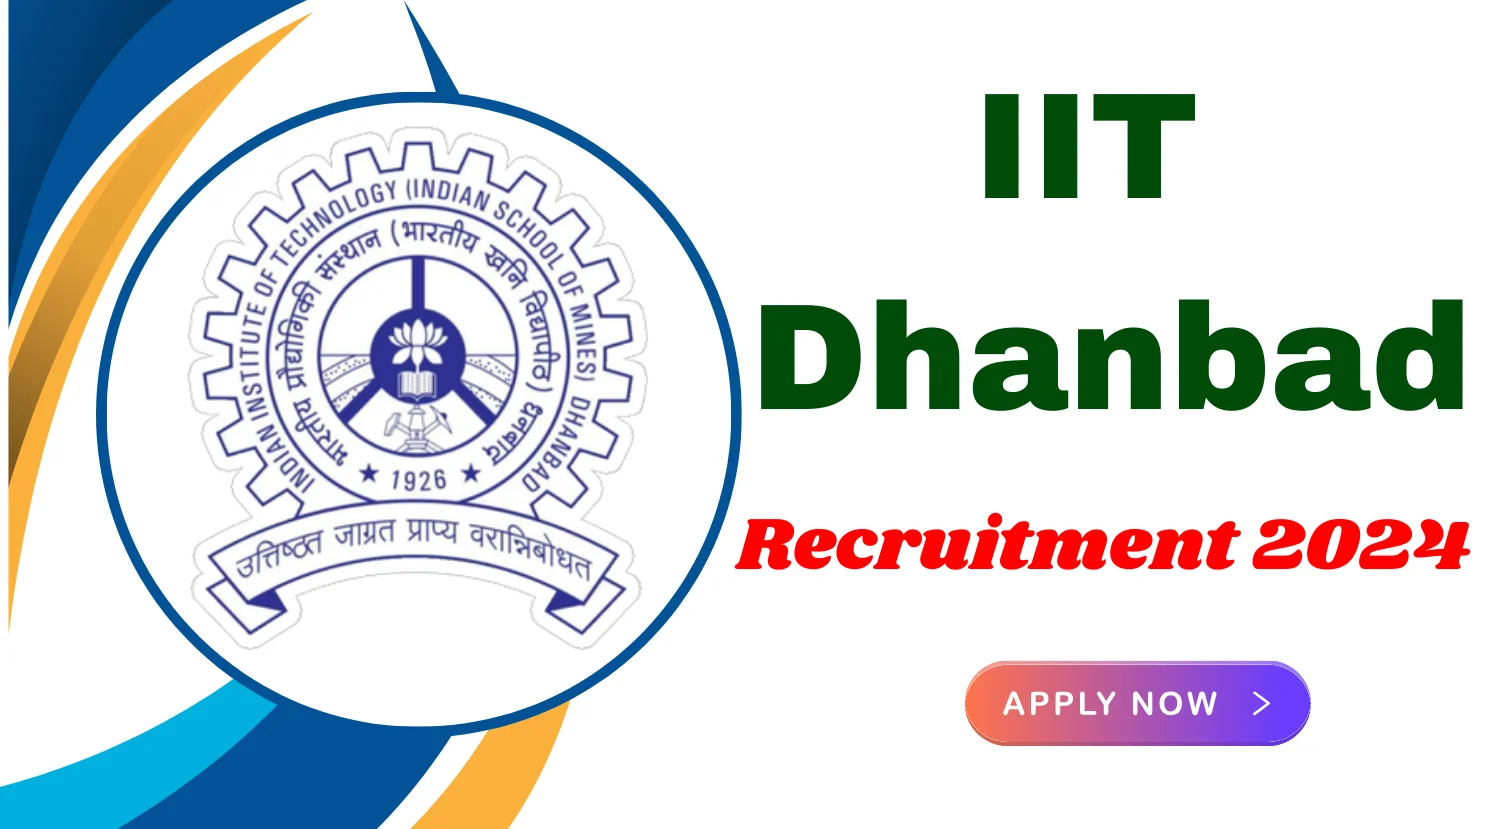 IIT Dhanbad Manager Innovation Recruitment 2024